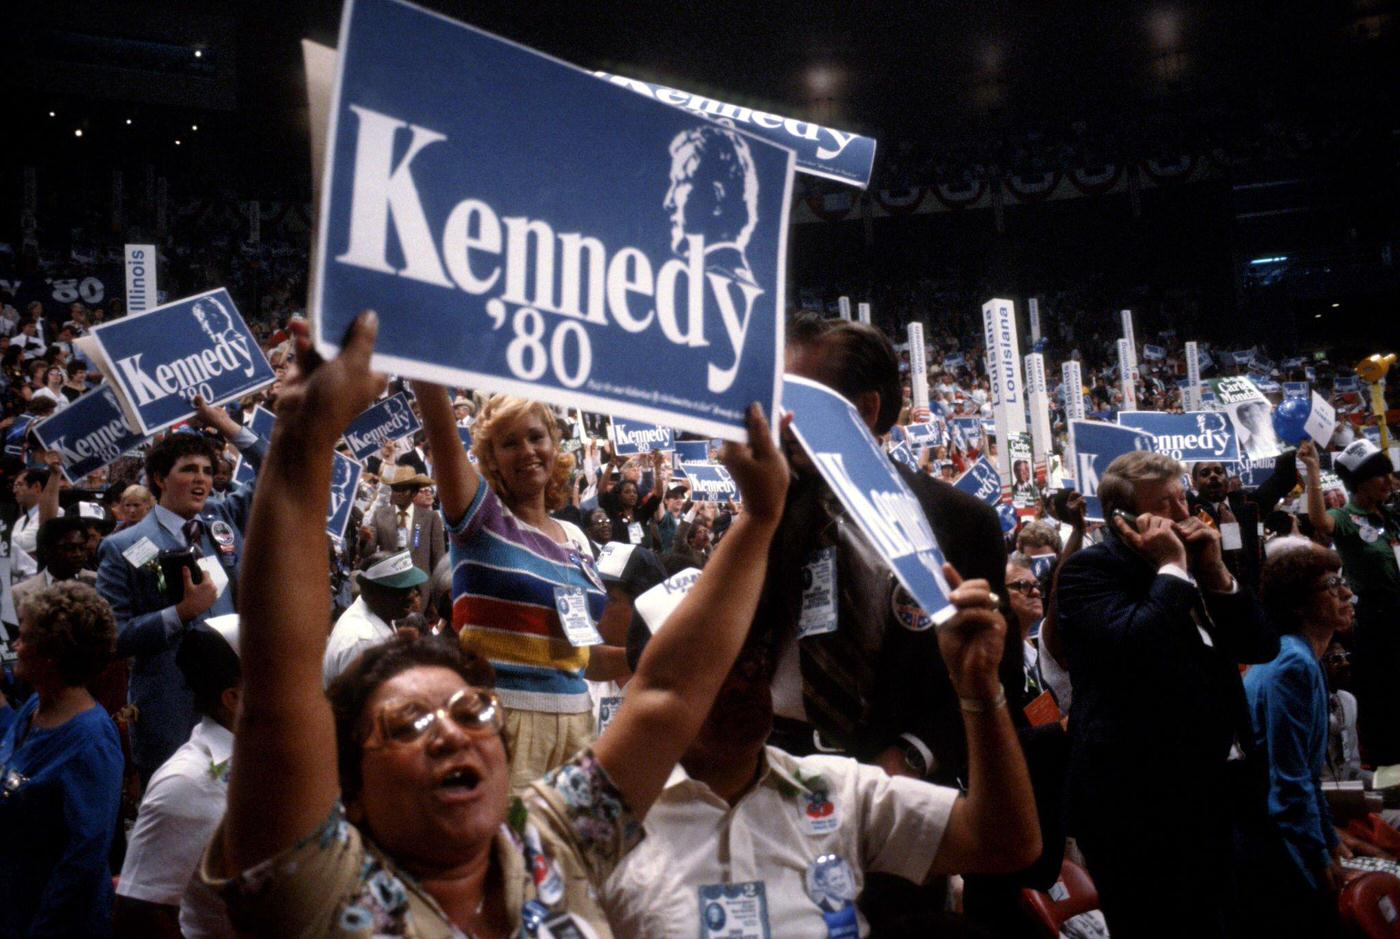 The 1980 Democratic National Convention Held At Madison Square Garden, Manhattan, 1980